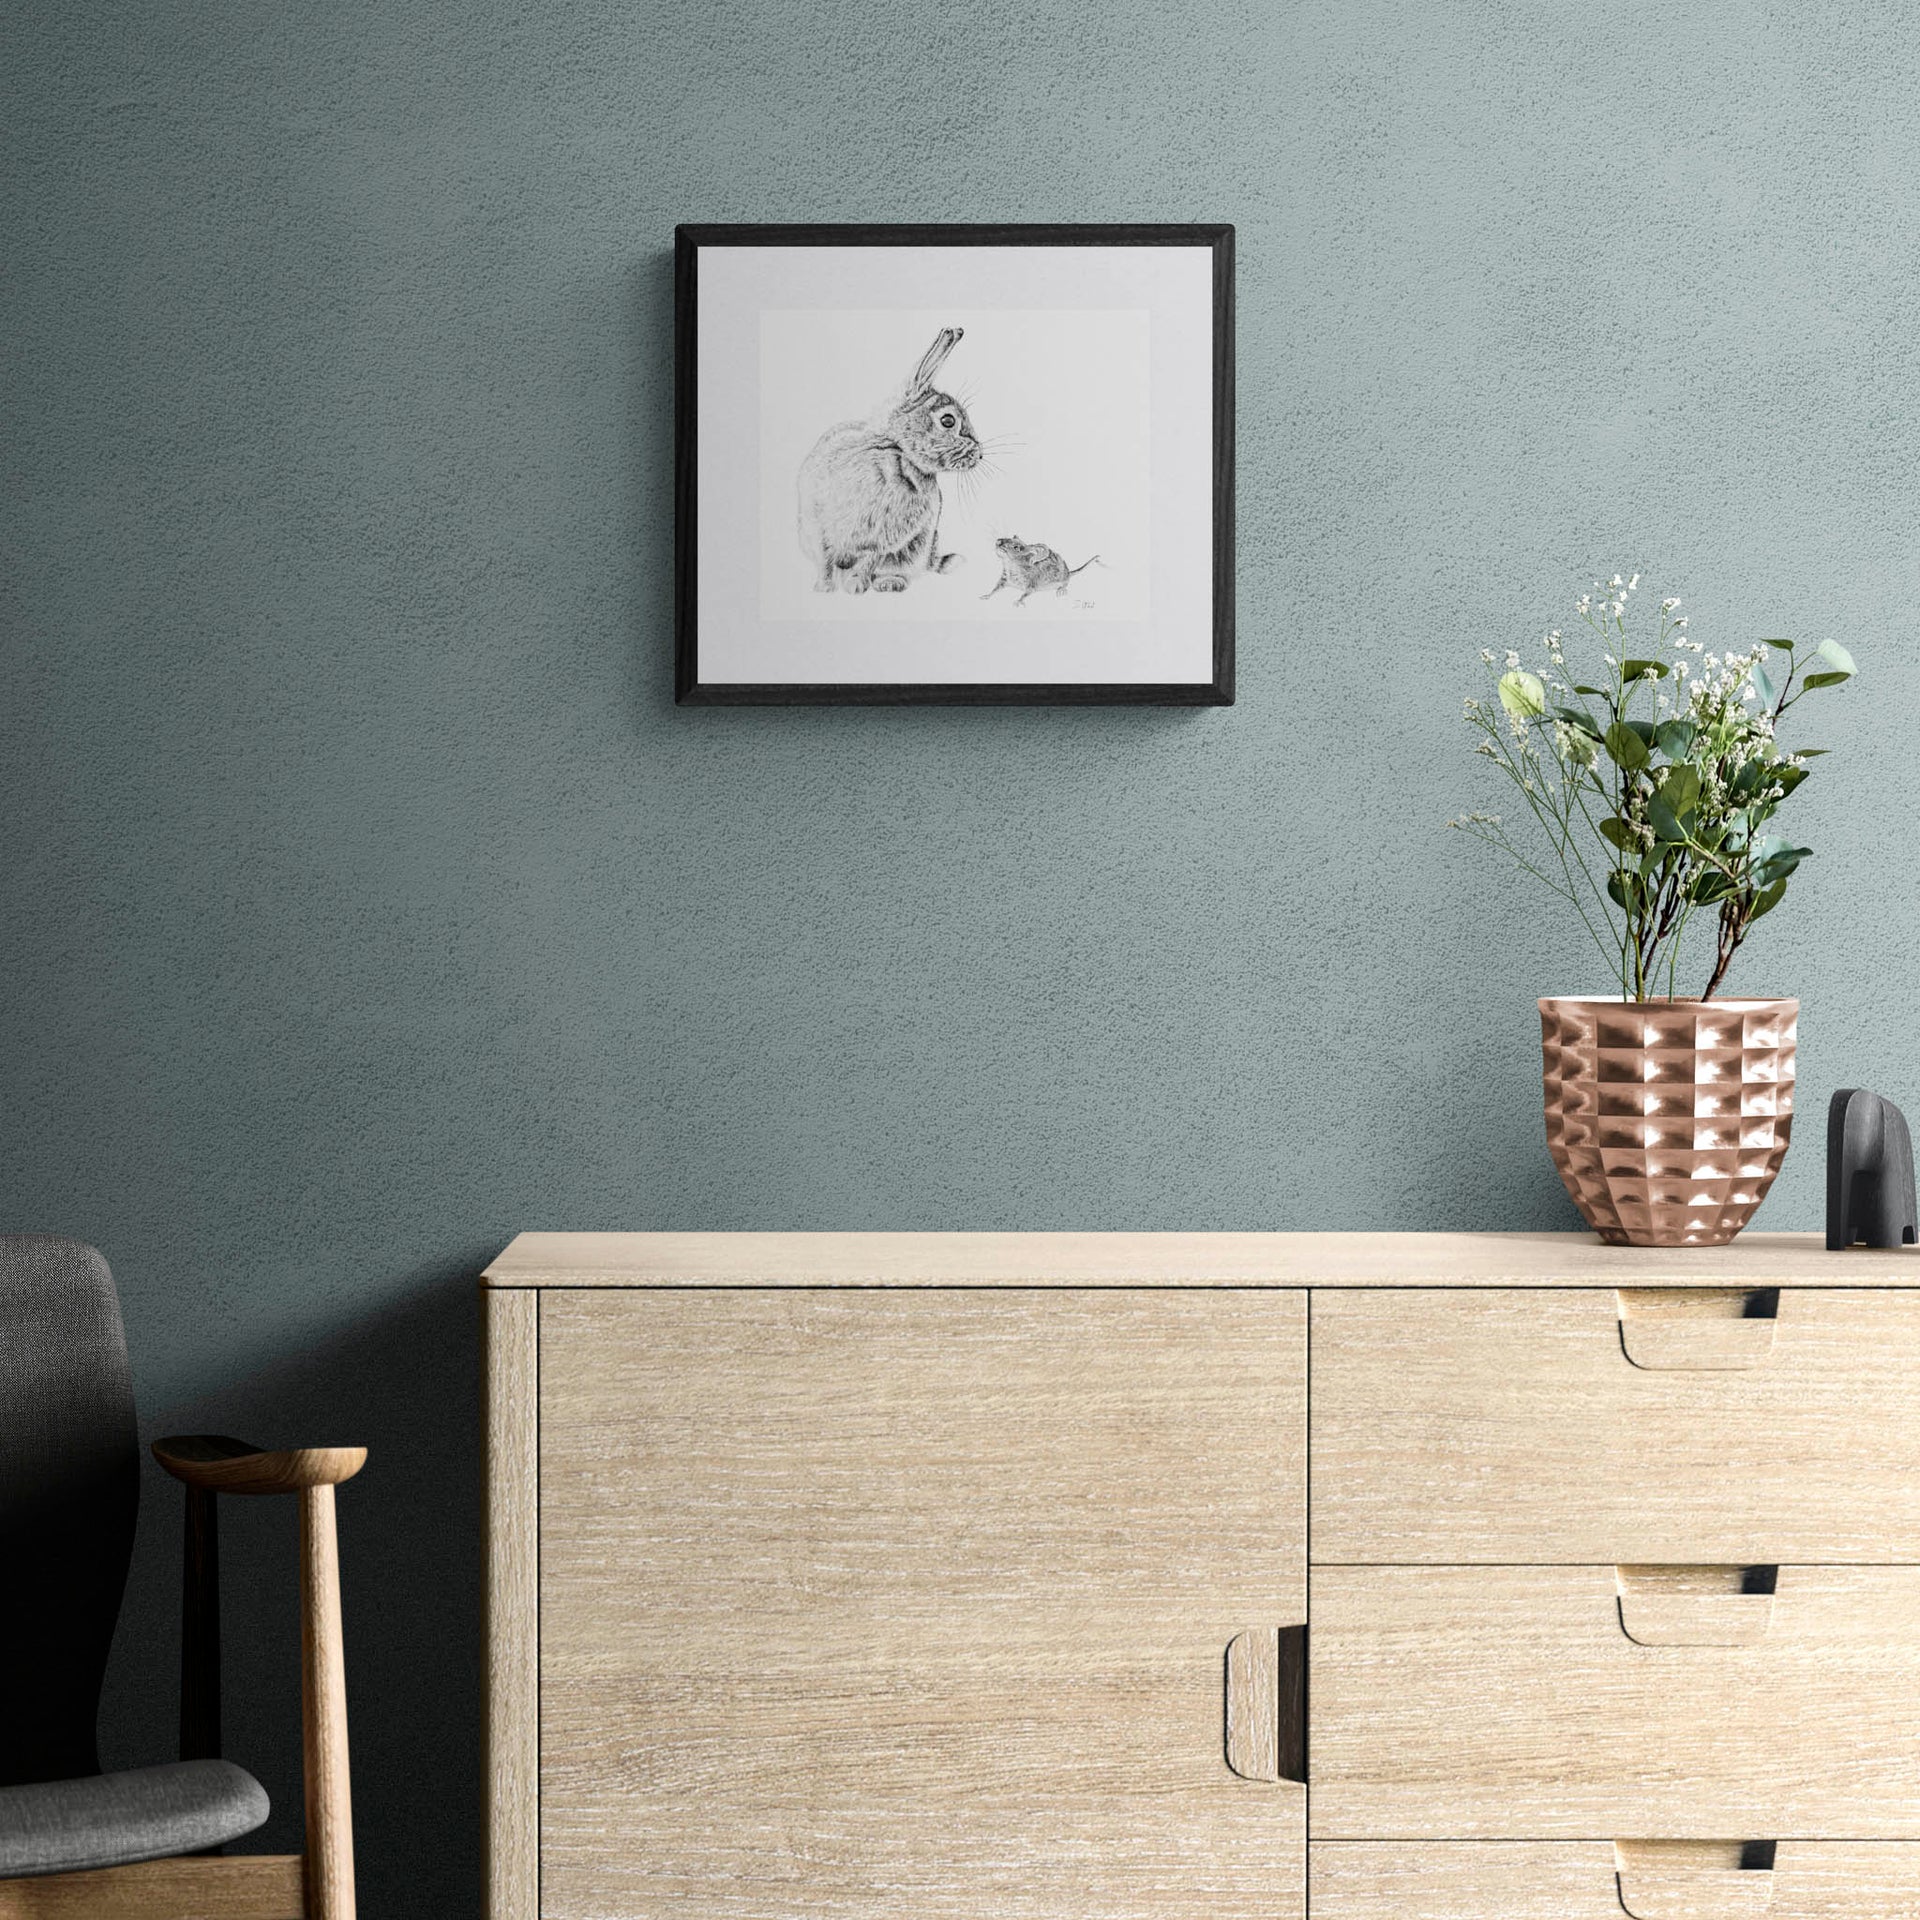 Rabbit and mouse drawing in black frame on wall